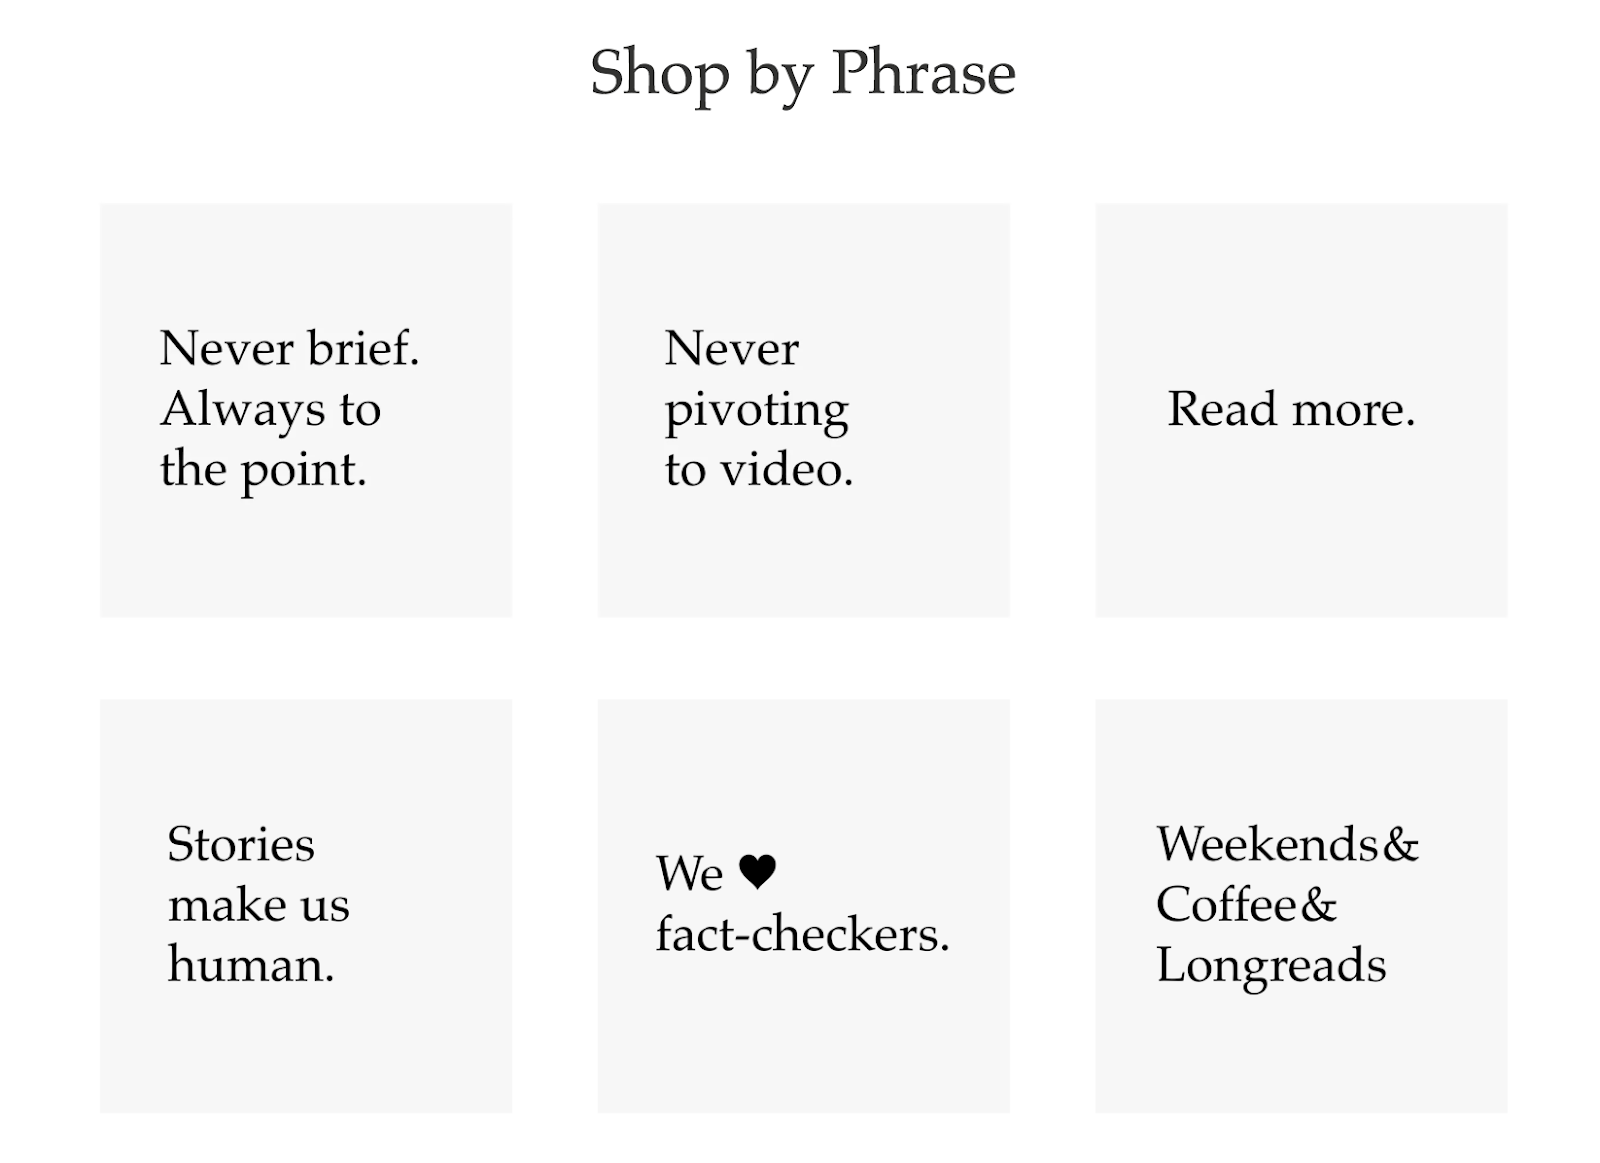 Shop by phrase - a neat feature of the Longreads store